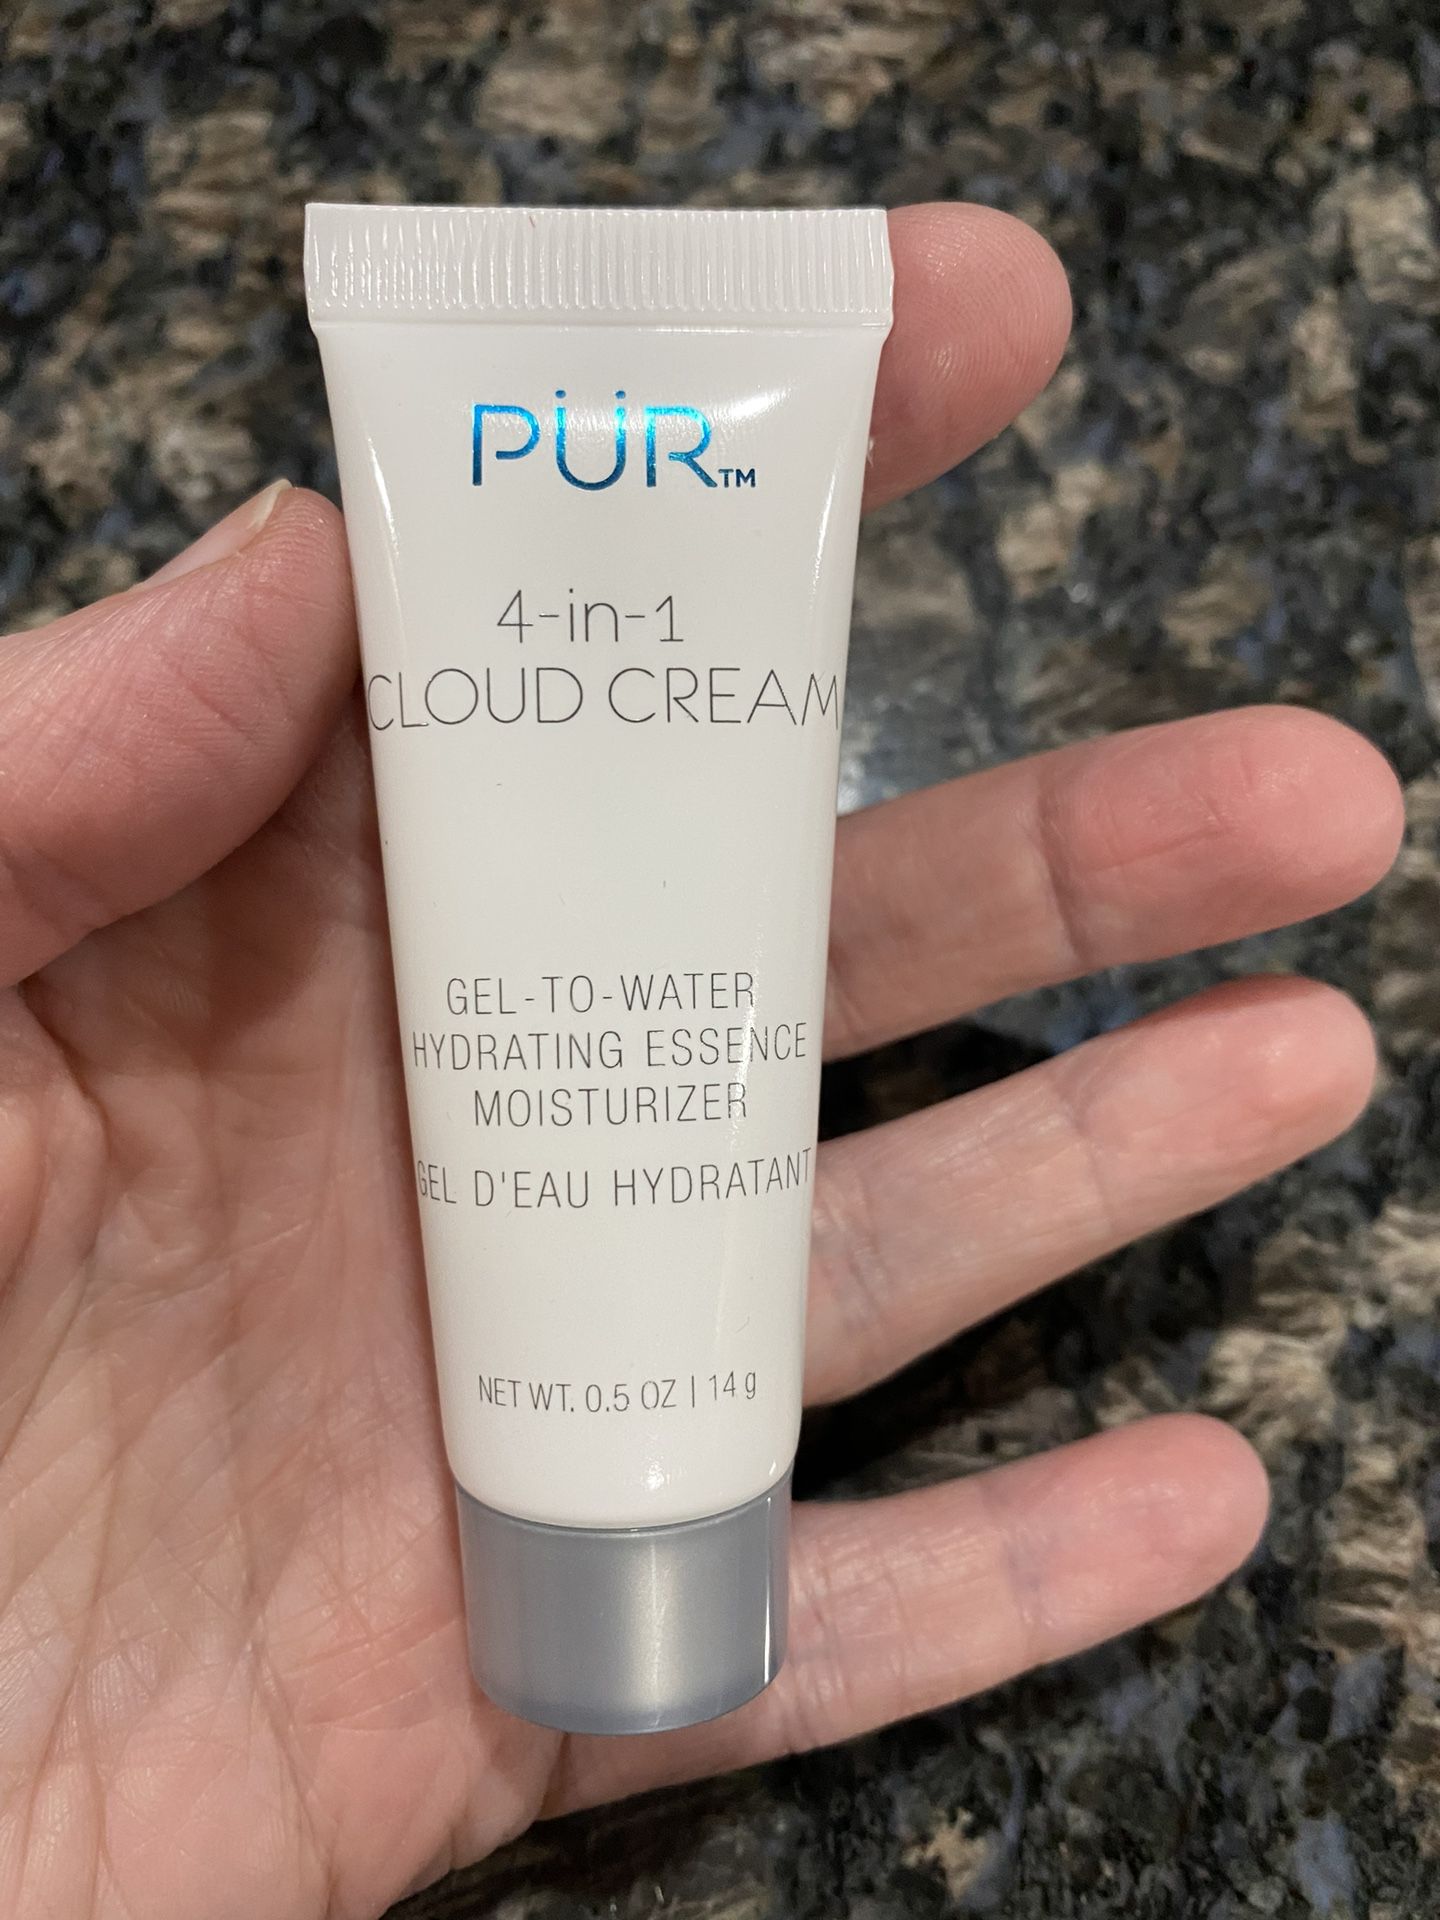 NEW PUR 4 IN 1 CLOUD CREAM GEL TO WATER HYDRATING ESSENCE MOISTURIZER $4!